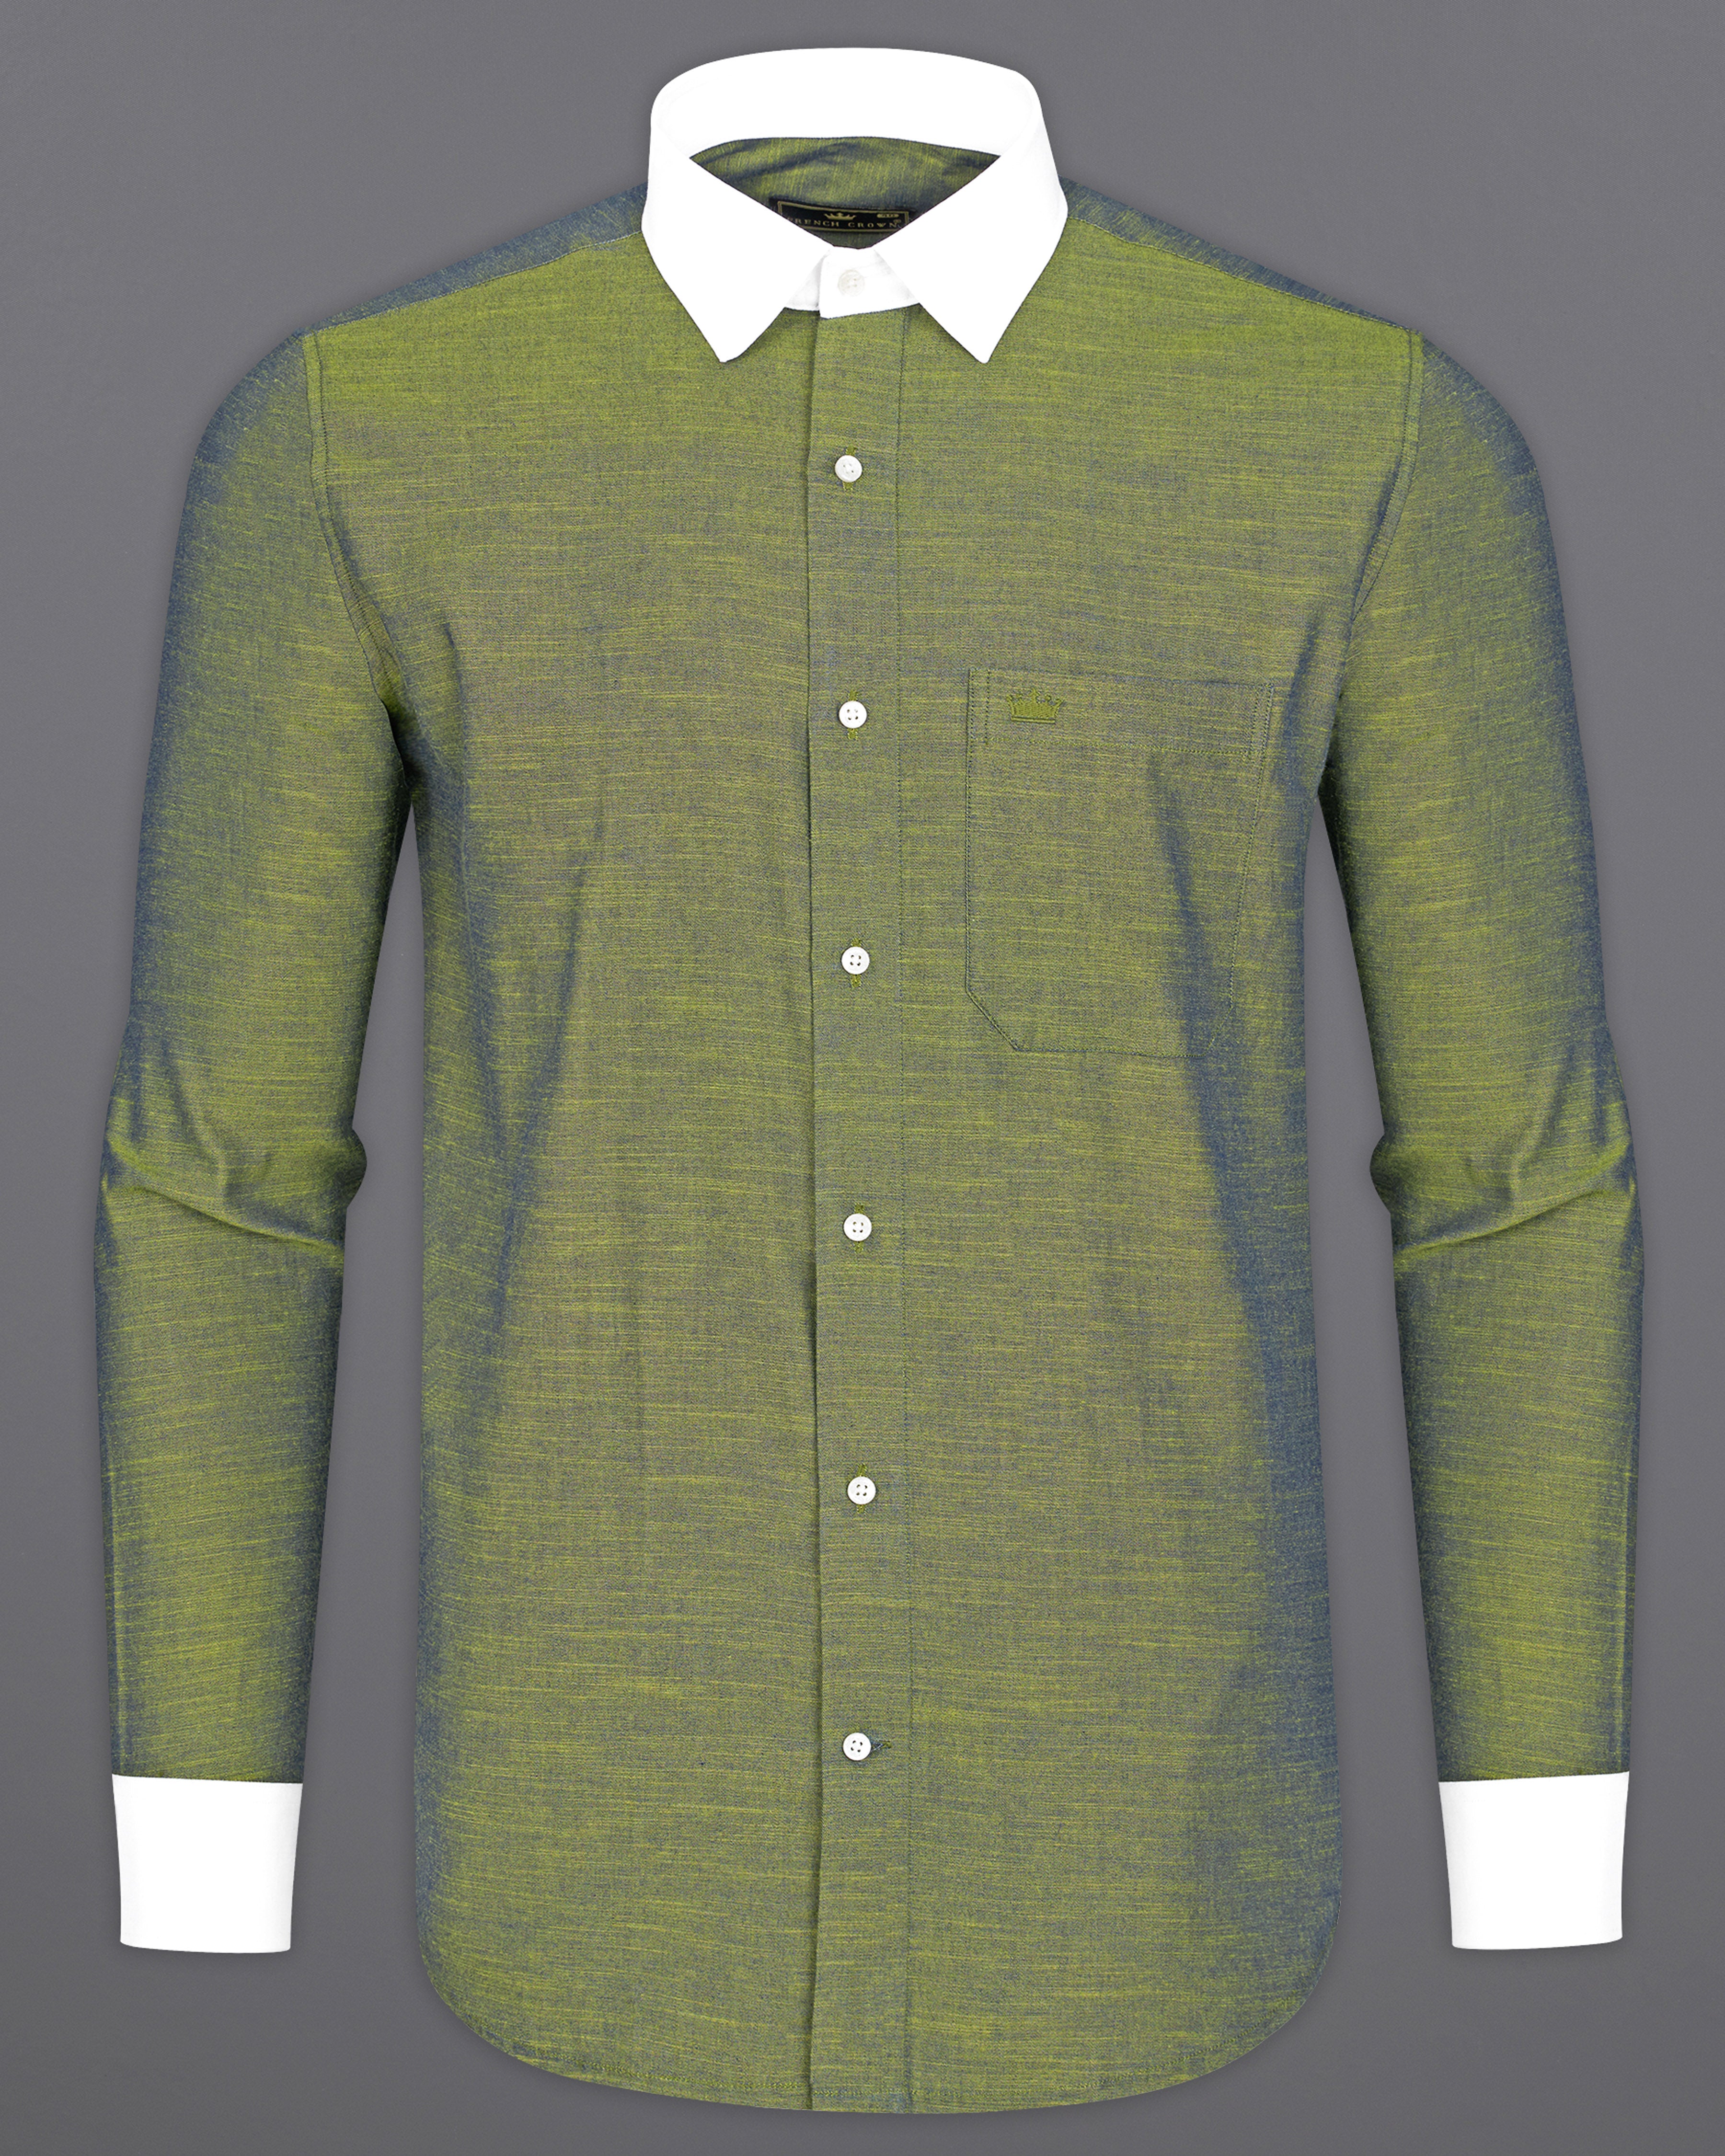 Moccasin Green with White Collar and Cuffs Luxurious Linen Shirt 9518-WCC-38, 9518-WCC-H-38, 9518-WCC-39, 9518-WCC-H-39, 9518-WCC-40, 9518-WCC-H-40, 9518-WCC-42, 9518-WCC-H-42, 9518-WCC-44, 9518-WCC-H-44, 9518-WCC-46, 9518-WCC-H-46, 9518-WCC-48, 9518-WCC-H-48, 9518-WCC-50, 9518-WCC-H-50, 9518-WCC-52, 9518-WCC-H-52